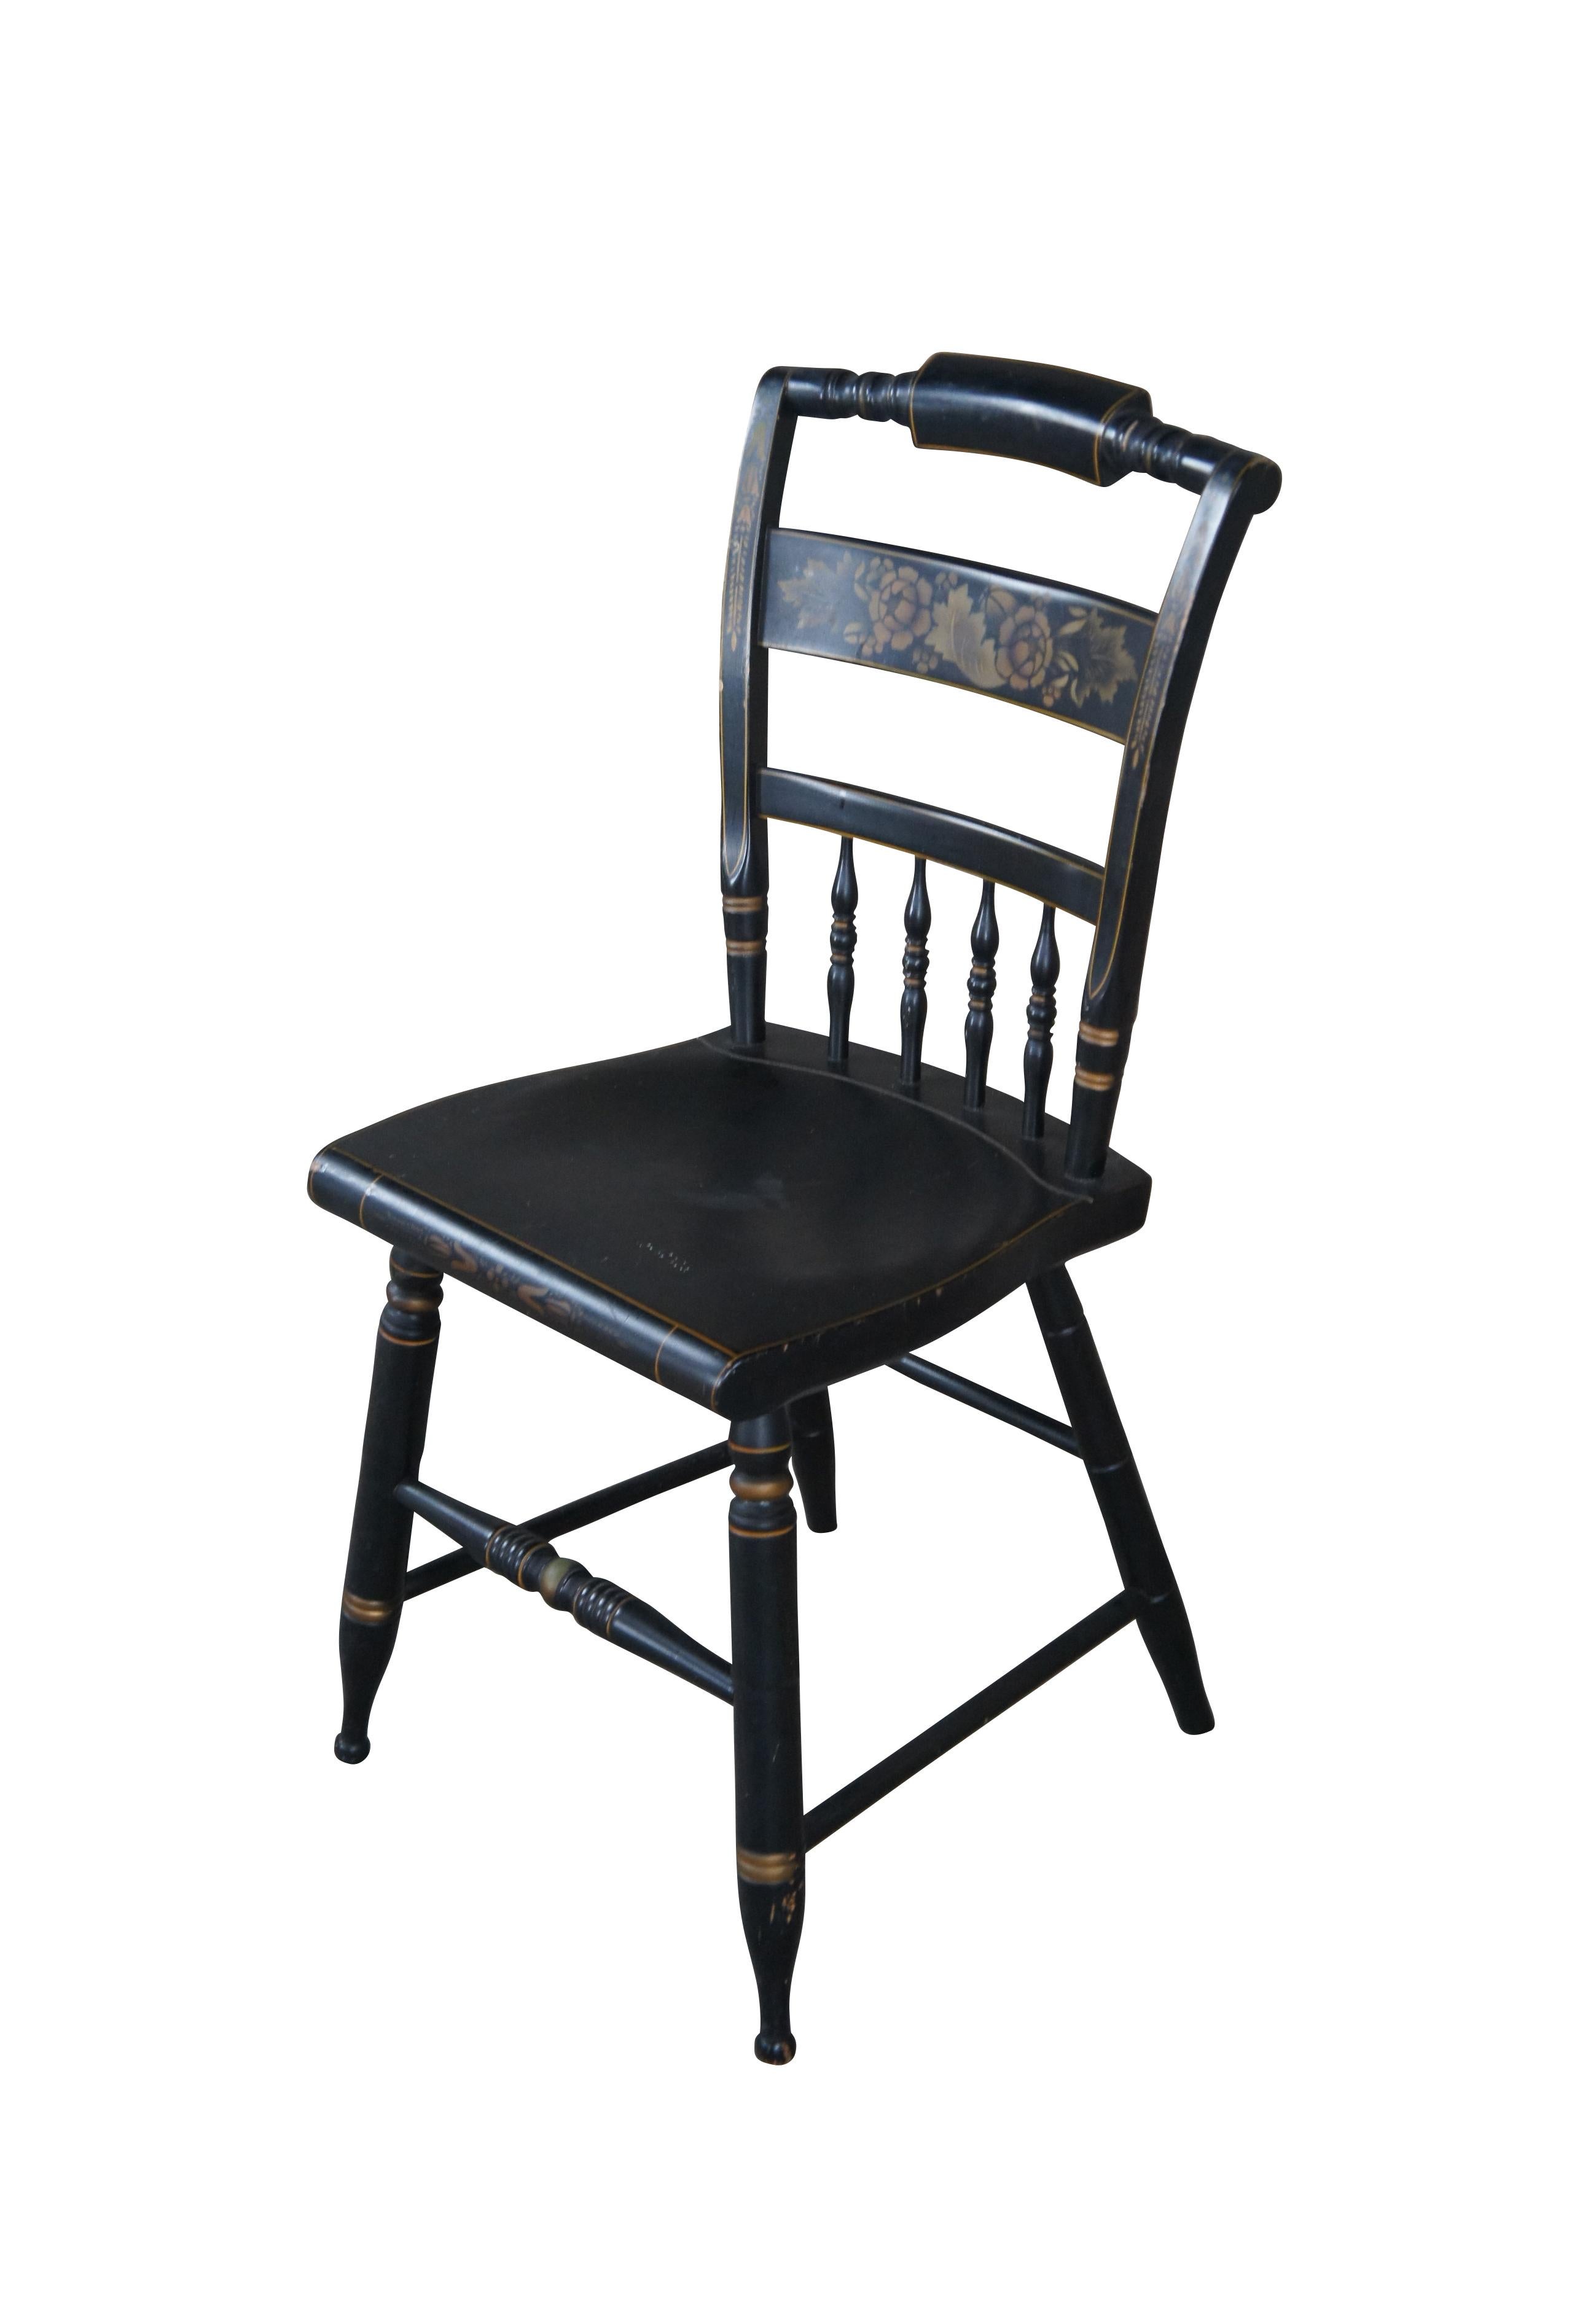 Mid-20th century Hitchcock stenciled farmhouse chair. Features a floral and leaf / foliate design with ribbed and slatted accents.

Dimensions:
17